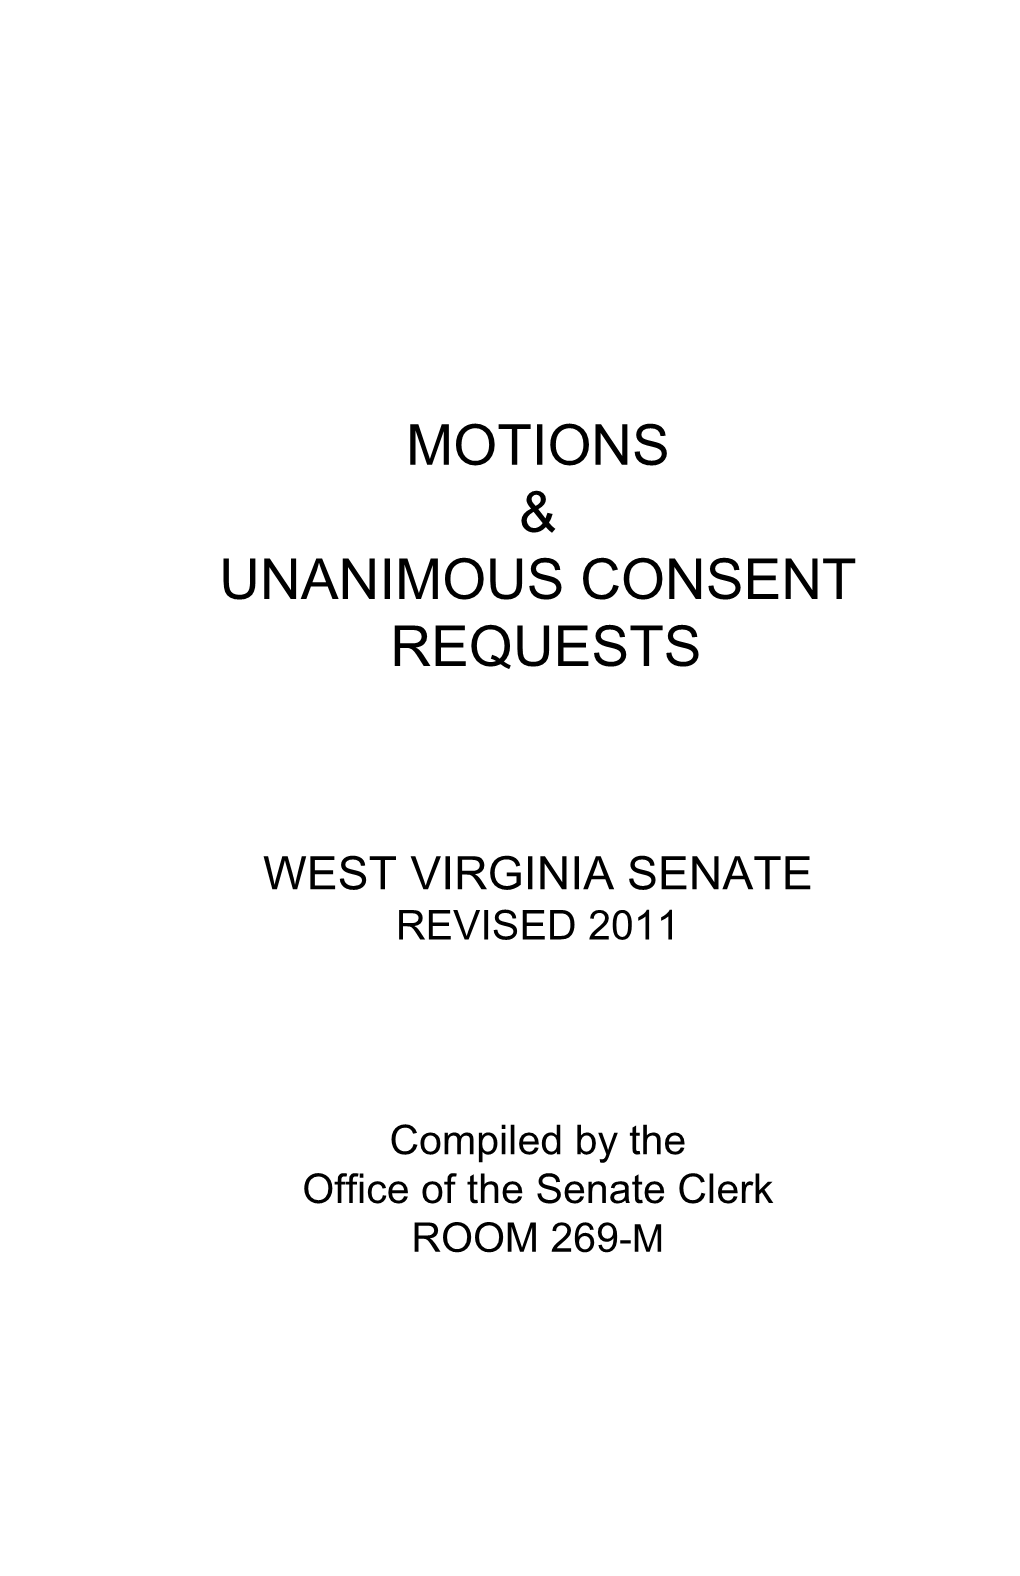 Motions & Unanimous Consent Requests